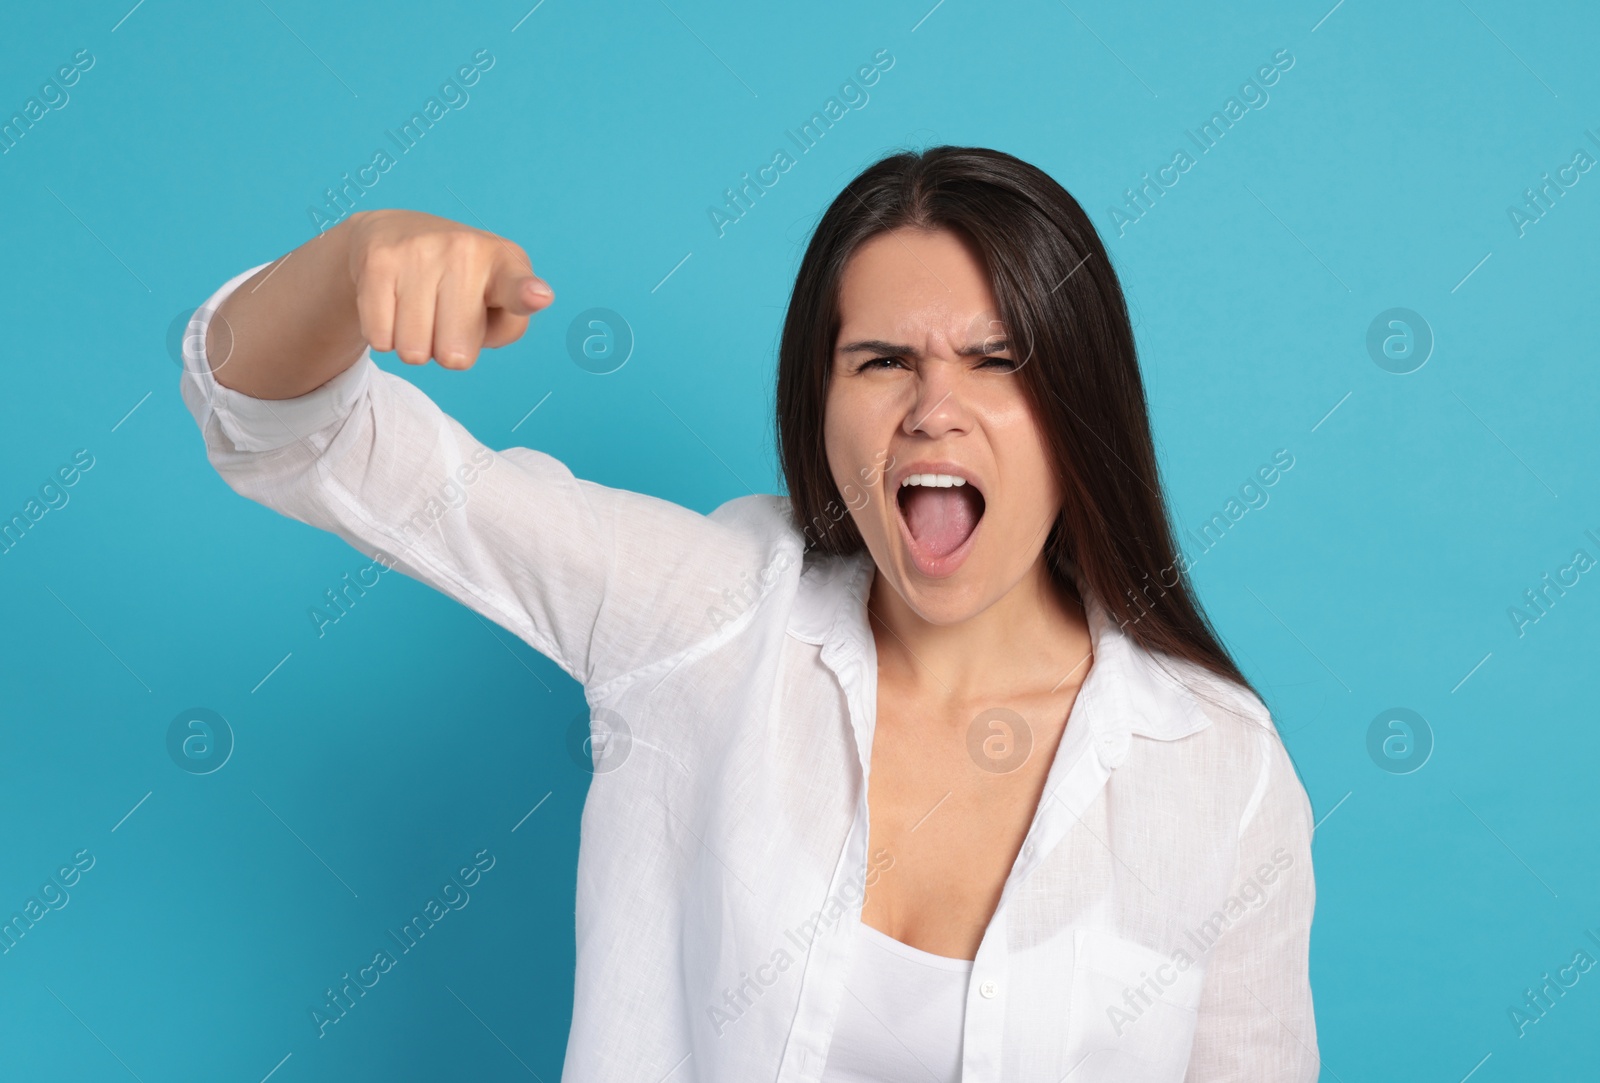 Photo of Aggressive young woman pointing on turquoise background